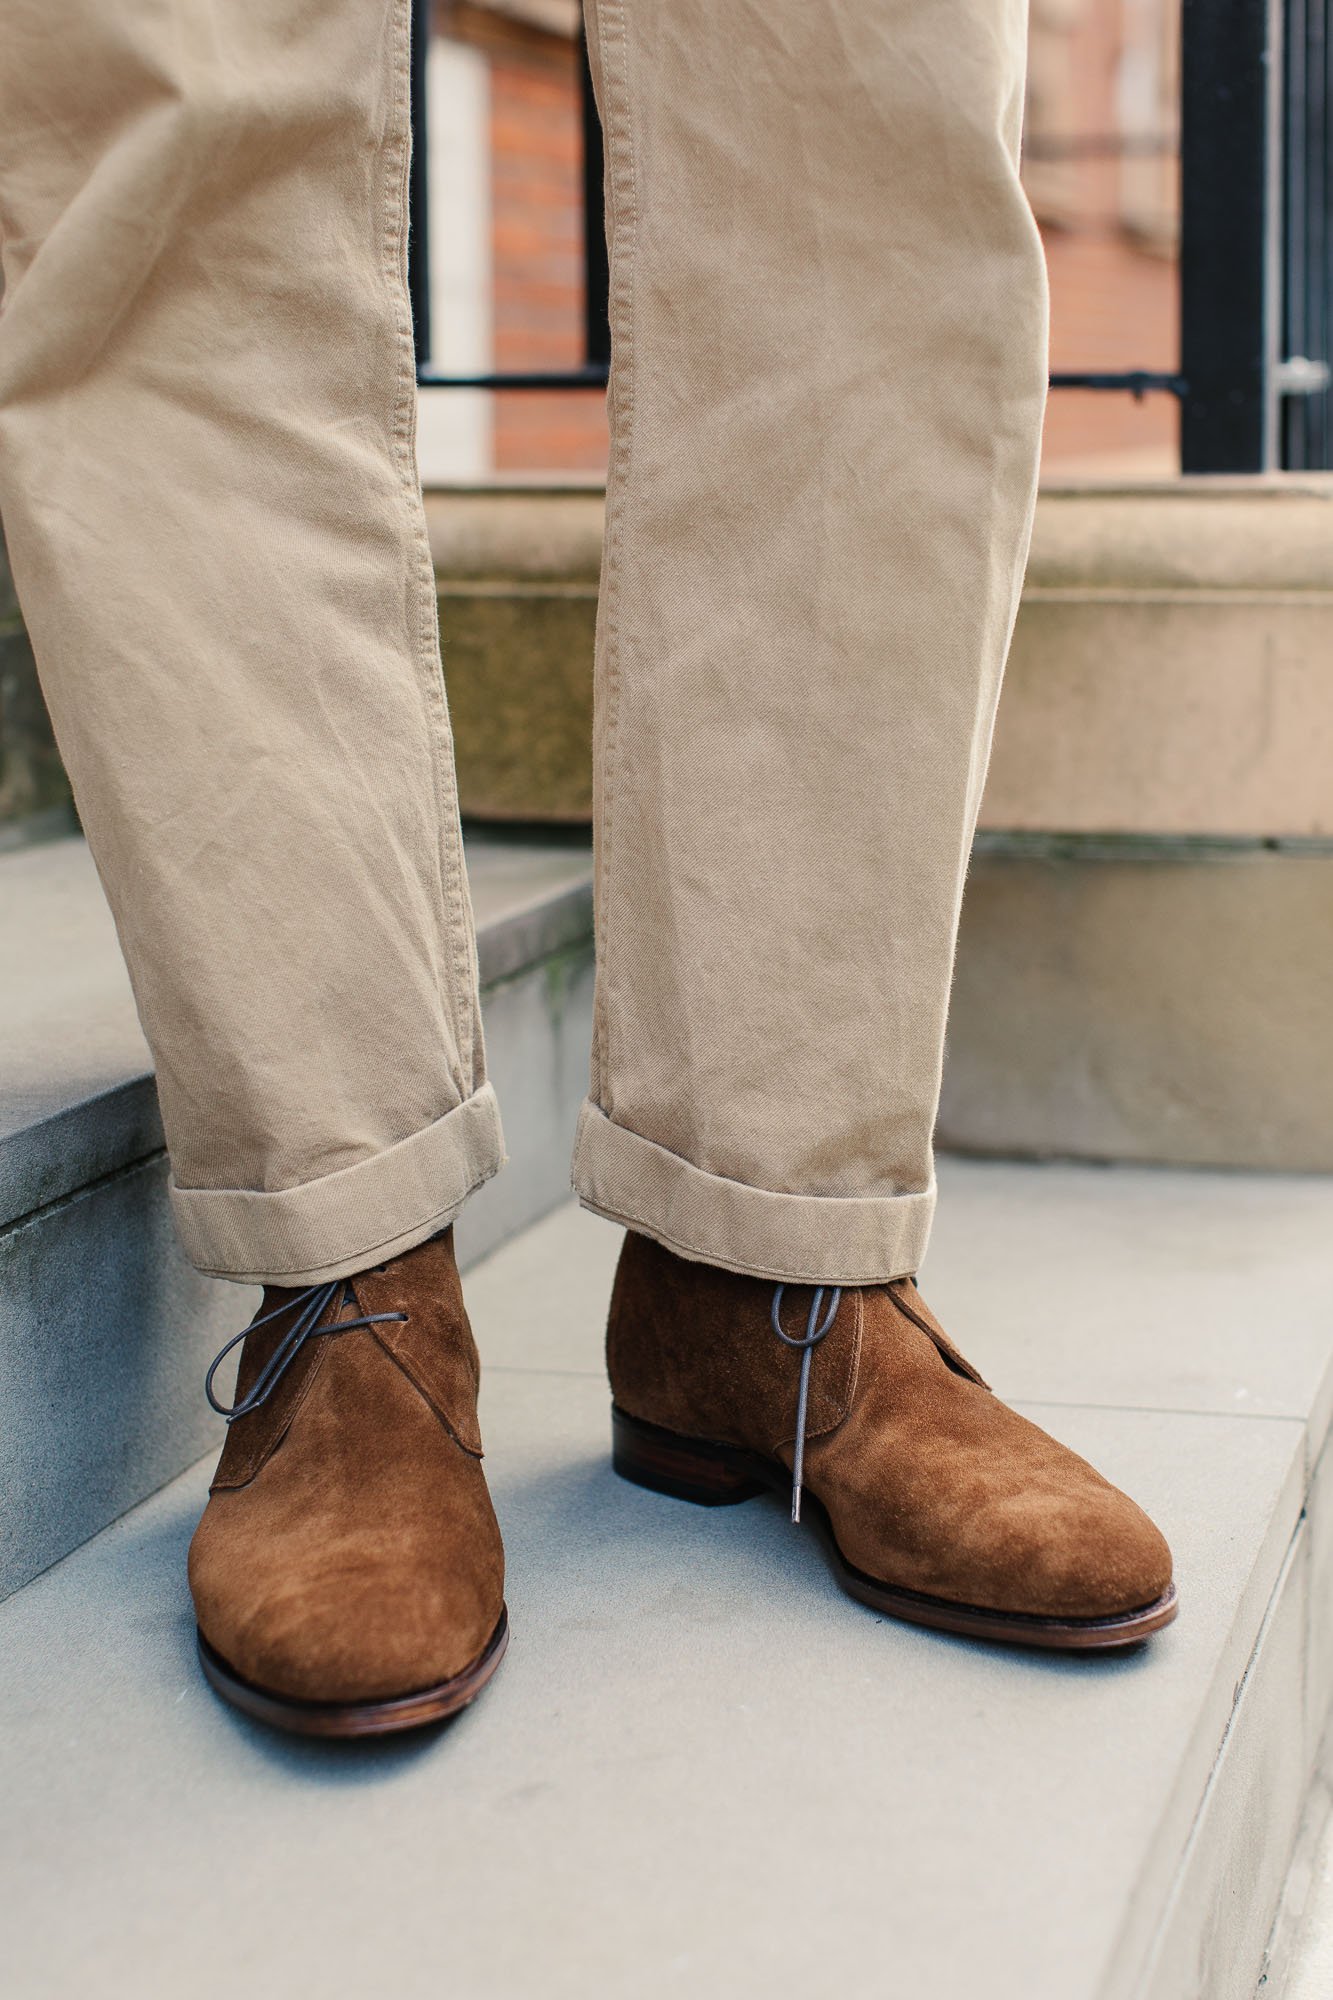 The Best Shoes To Wear With Shorts - The Cheaney Journal